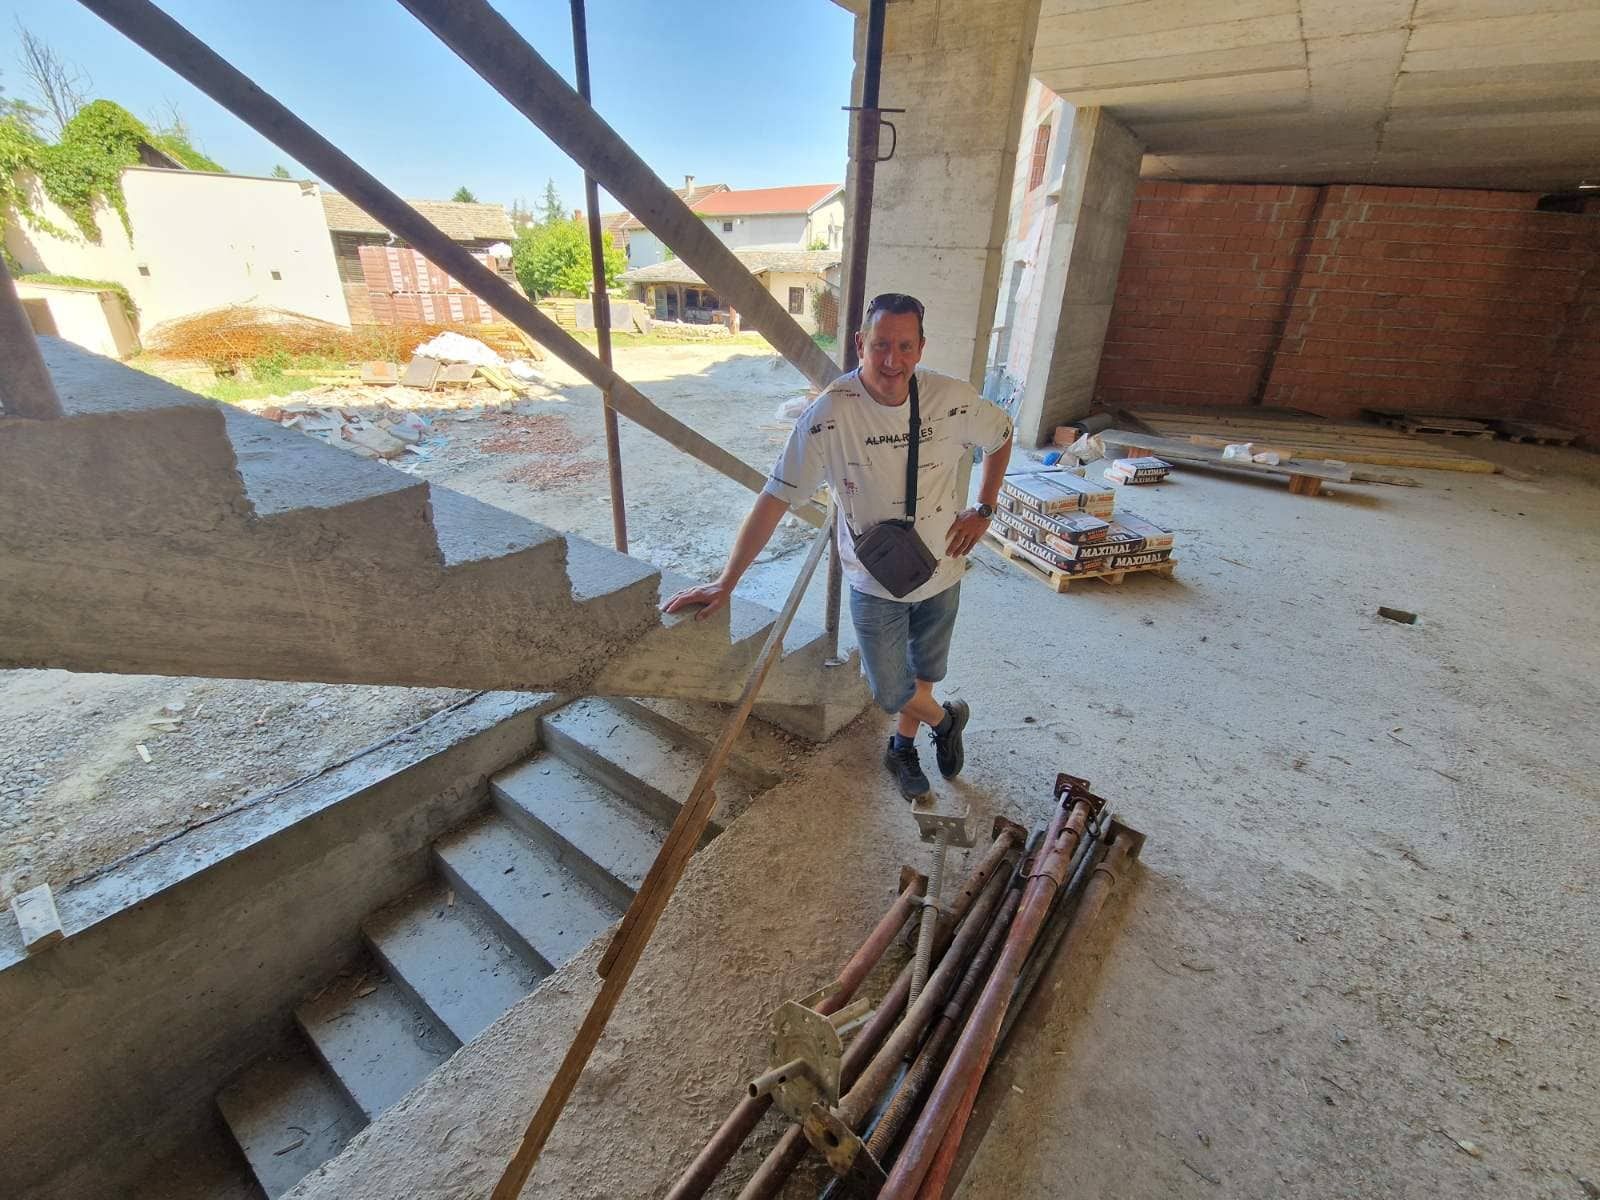 Boss says build stairs, I build stairs.